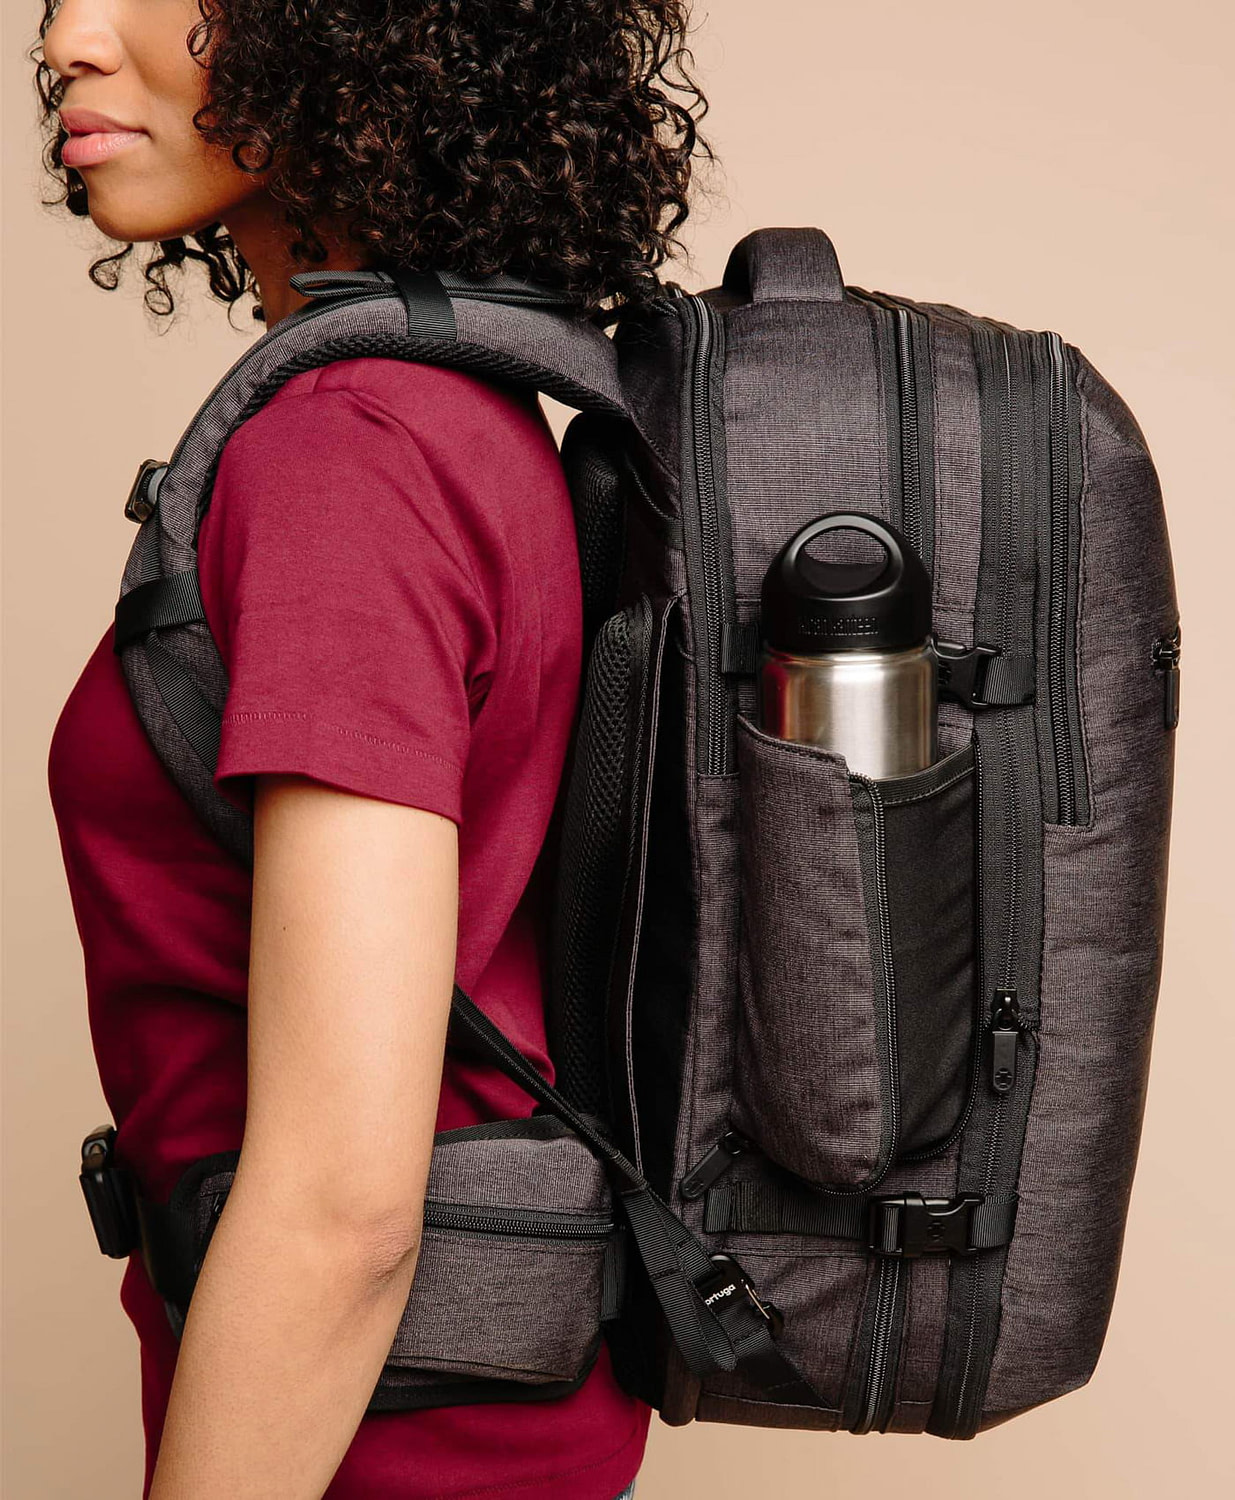 Best Carry-On Backpack for Women